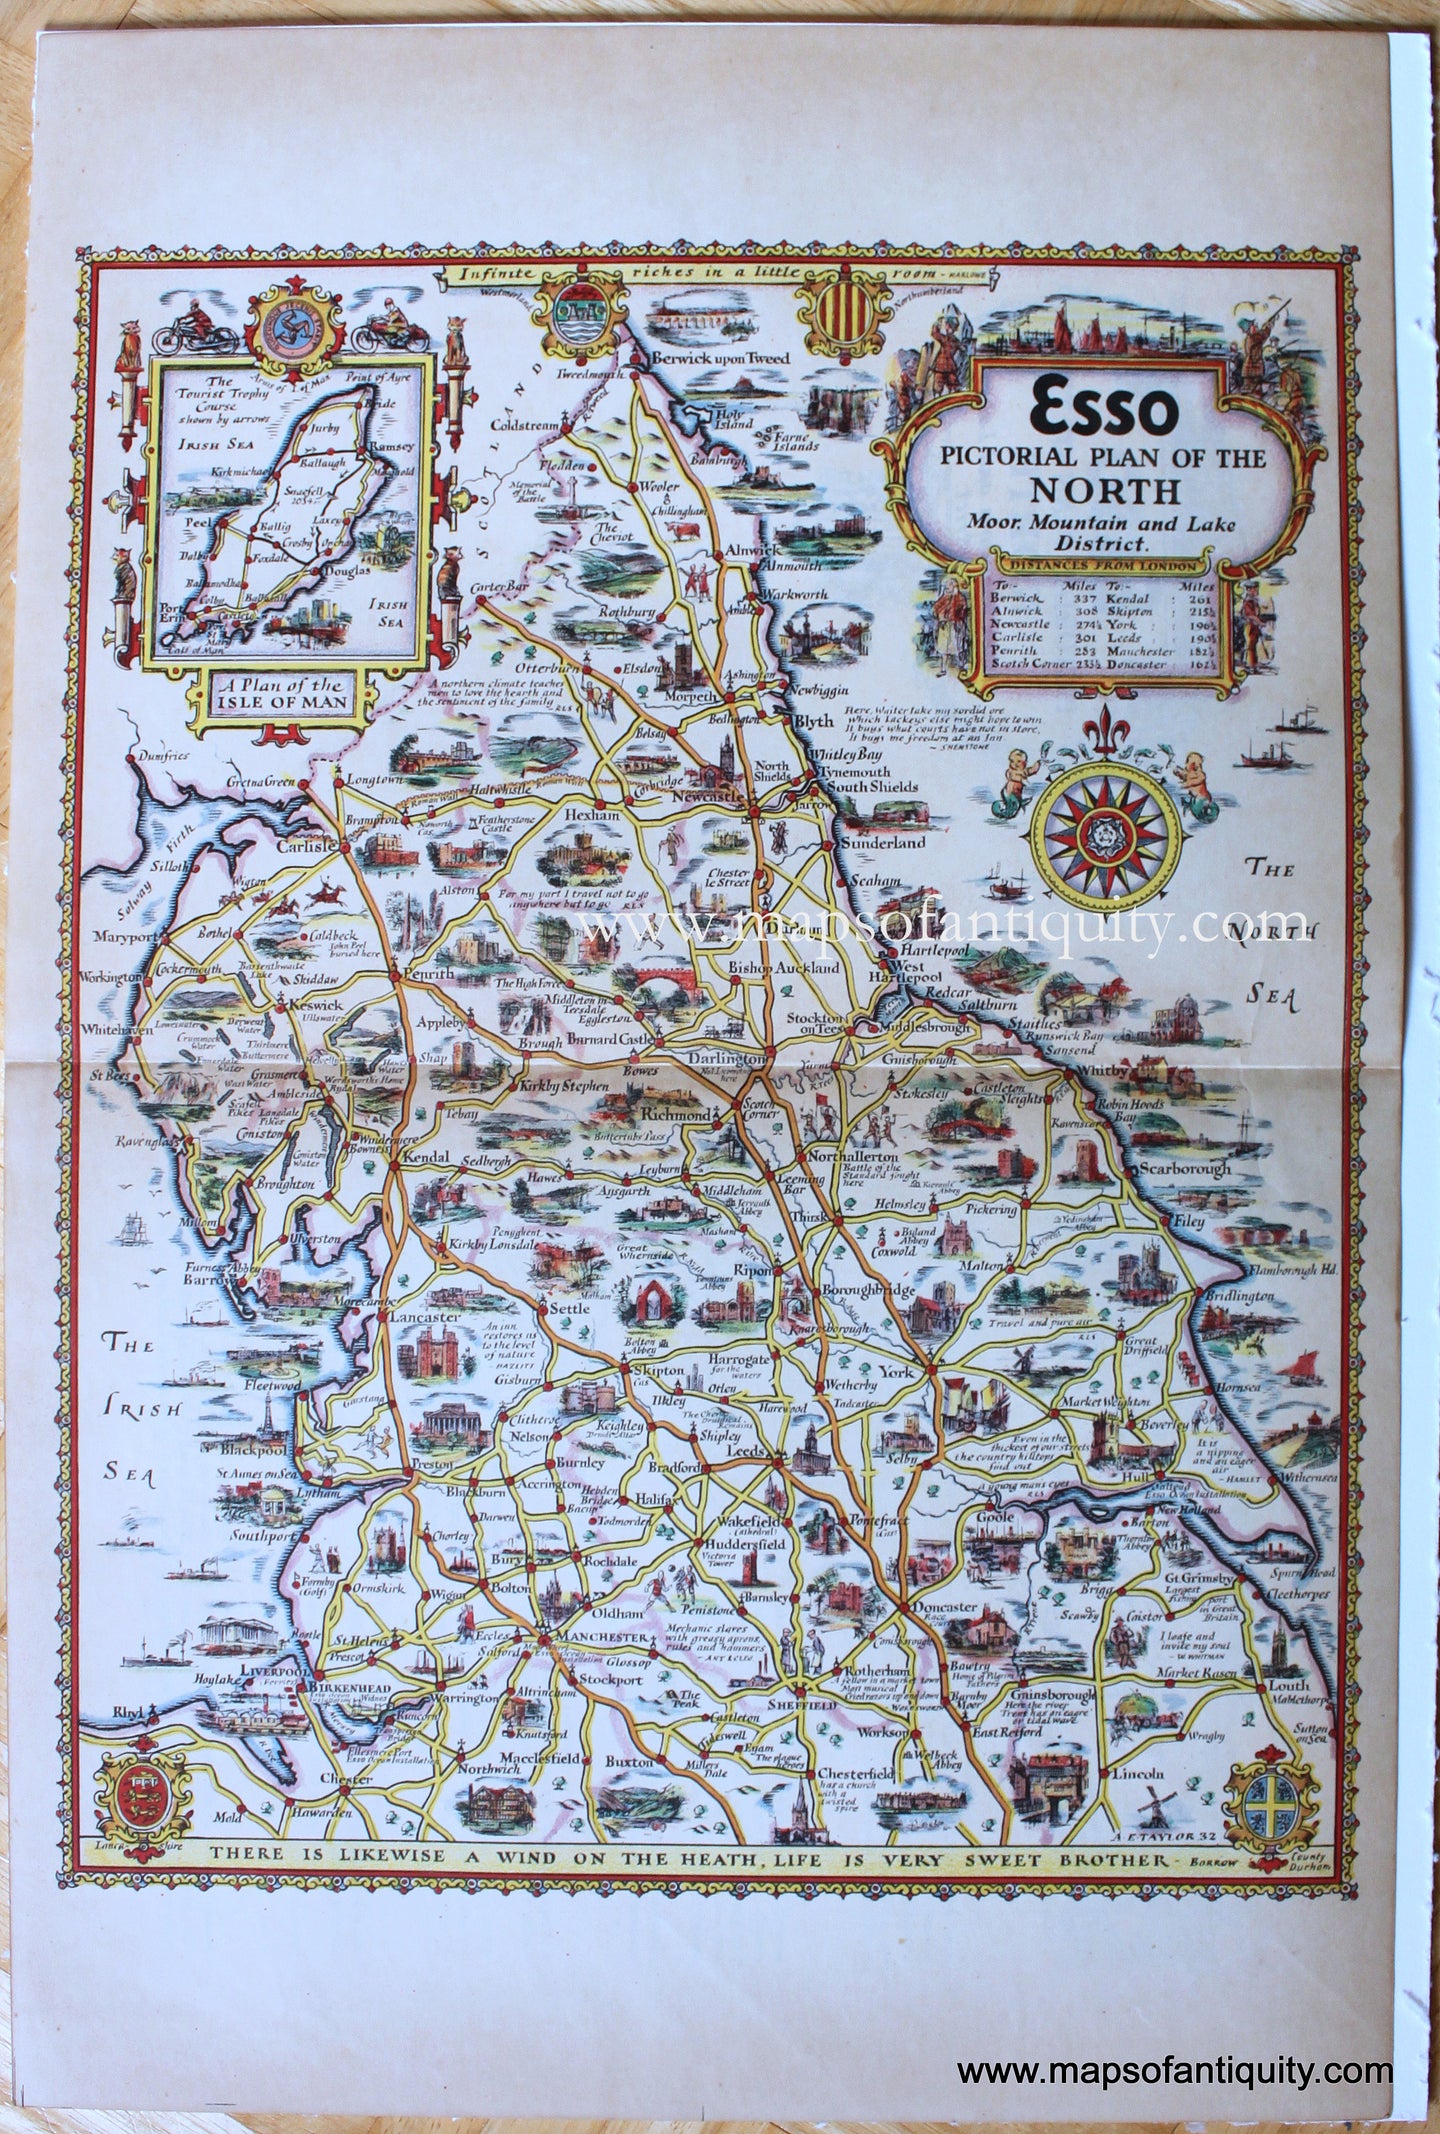 Genuine-Antique-Pictorial-Map-Esso-Pictorial-Plan-of-the-North-1932-A.E.-Taylor-Maps-Of-Antiquity